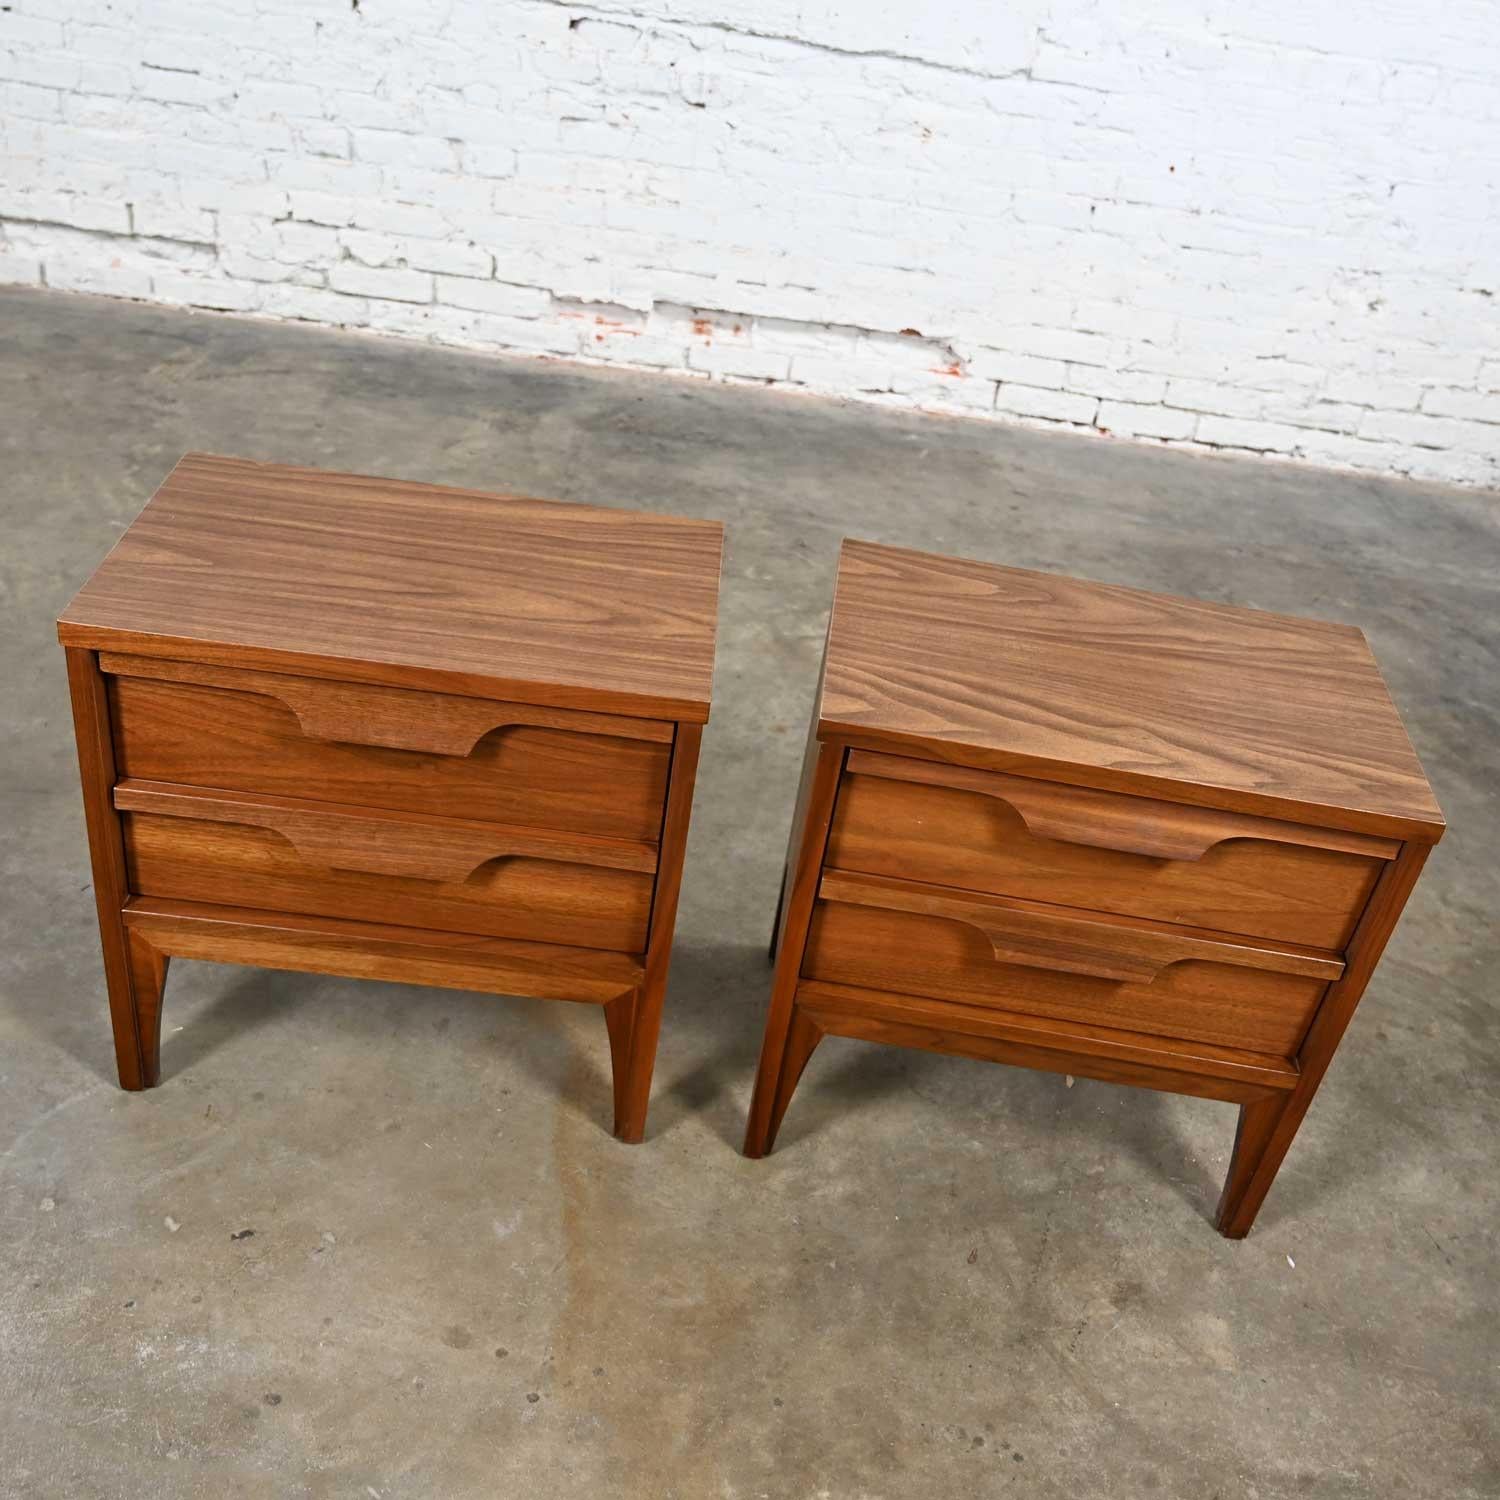 20th Century MCM Johnson Carper Fashion Trend Pair of Walnut Nightstands or End Tables